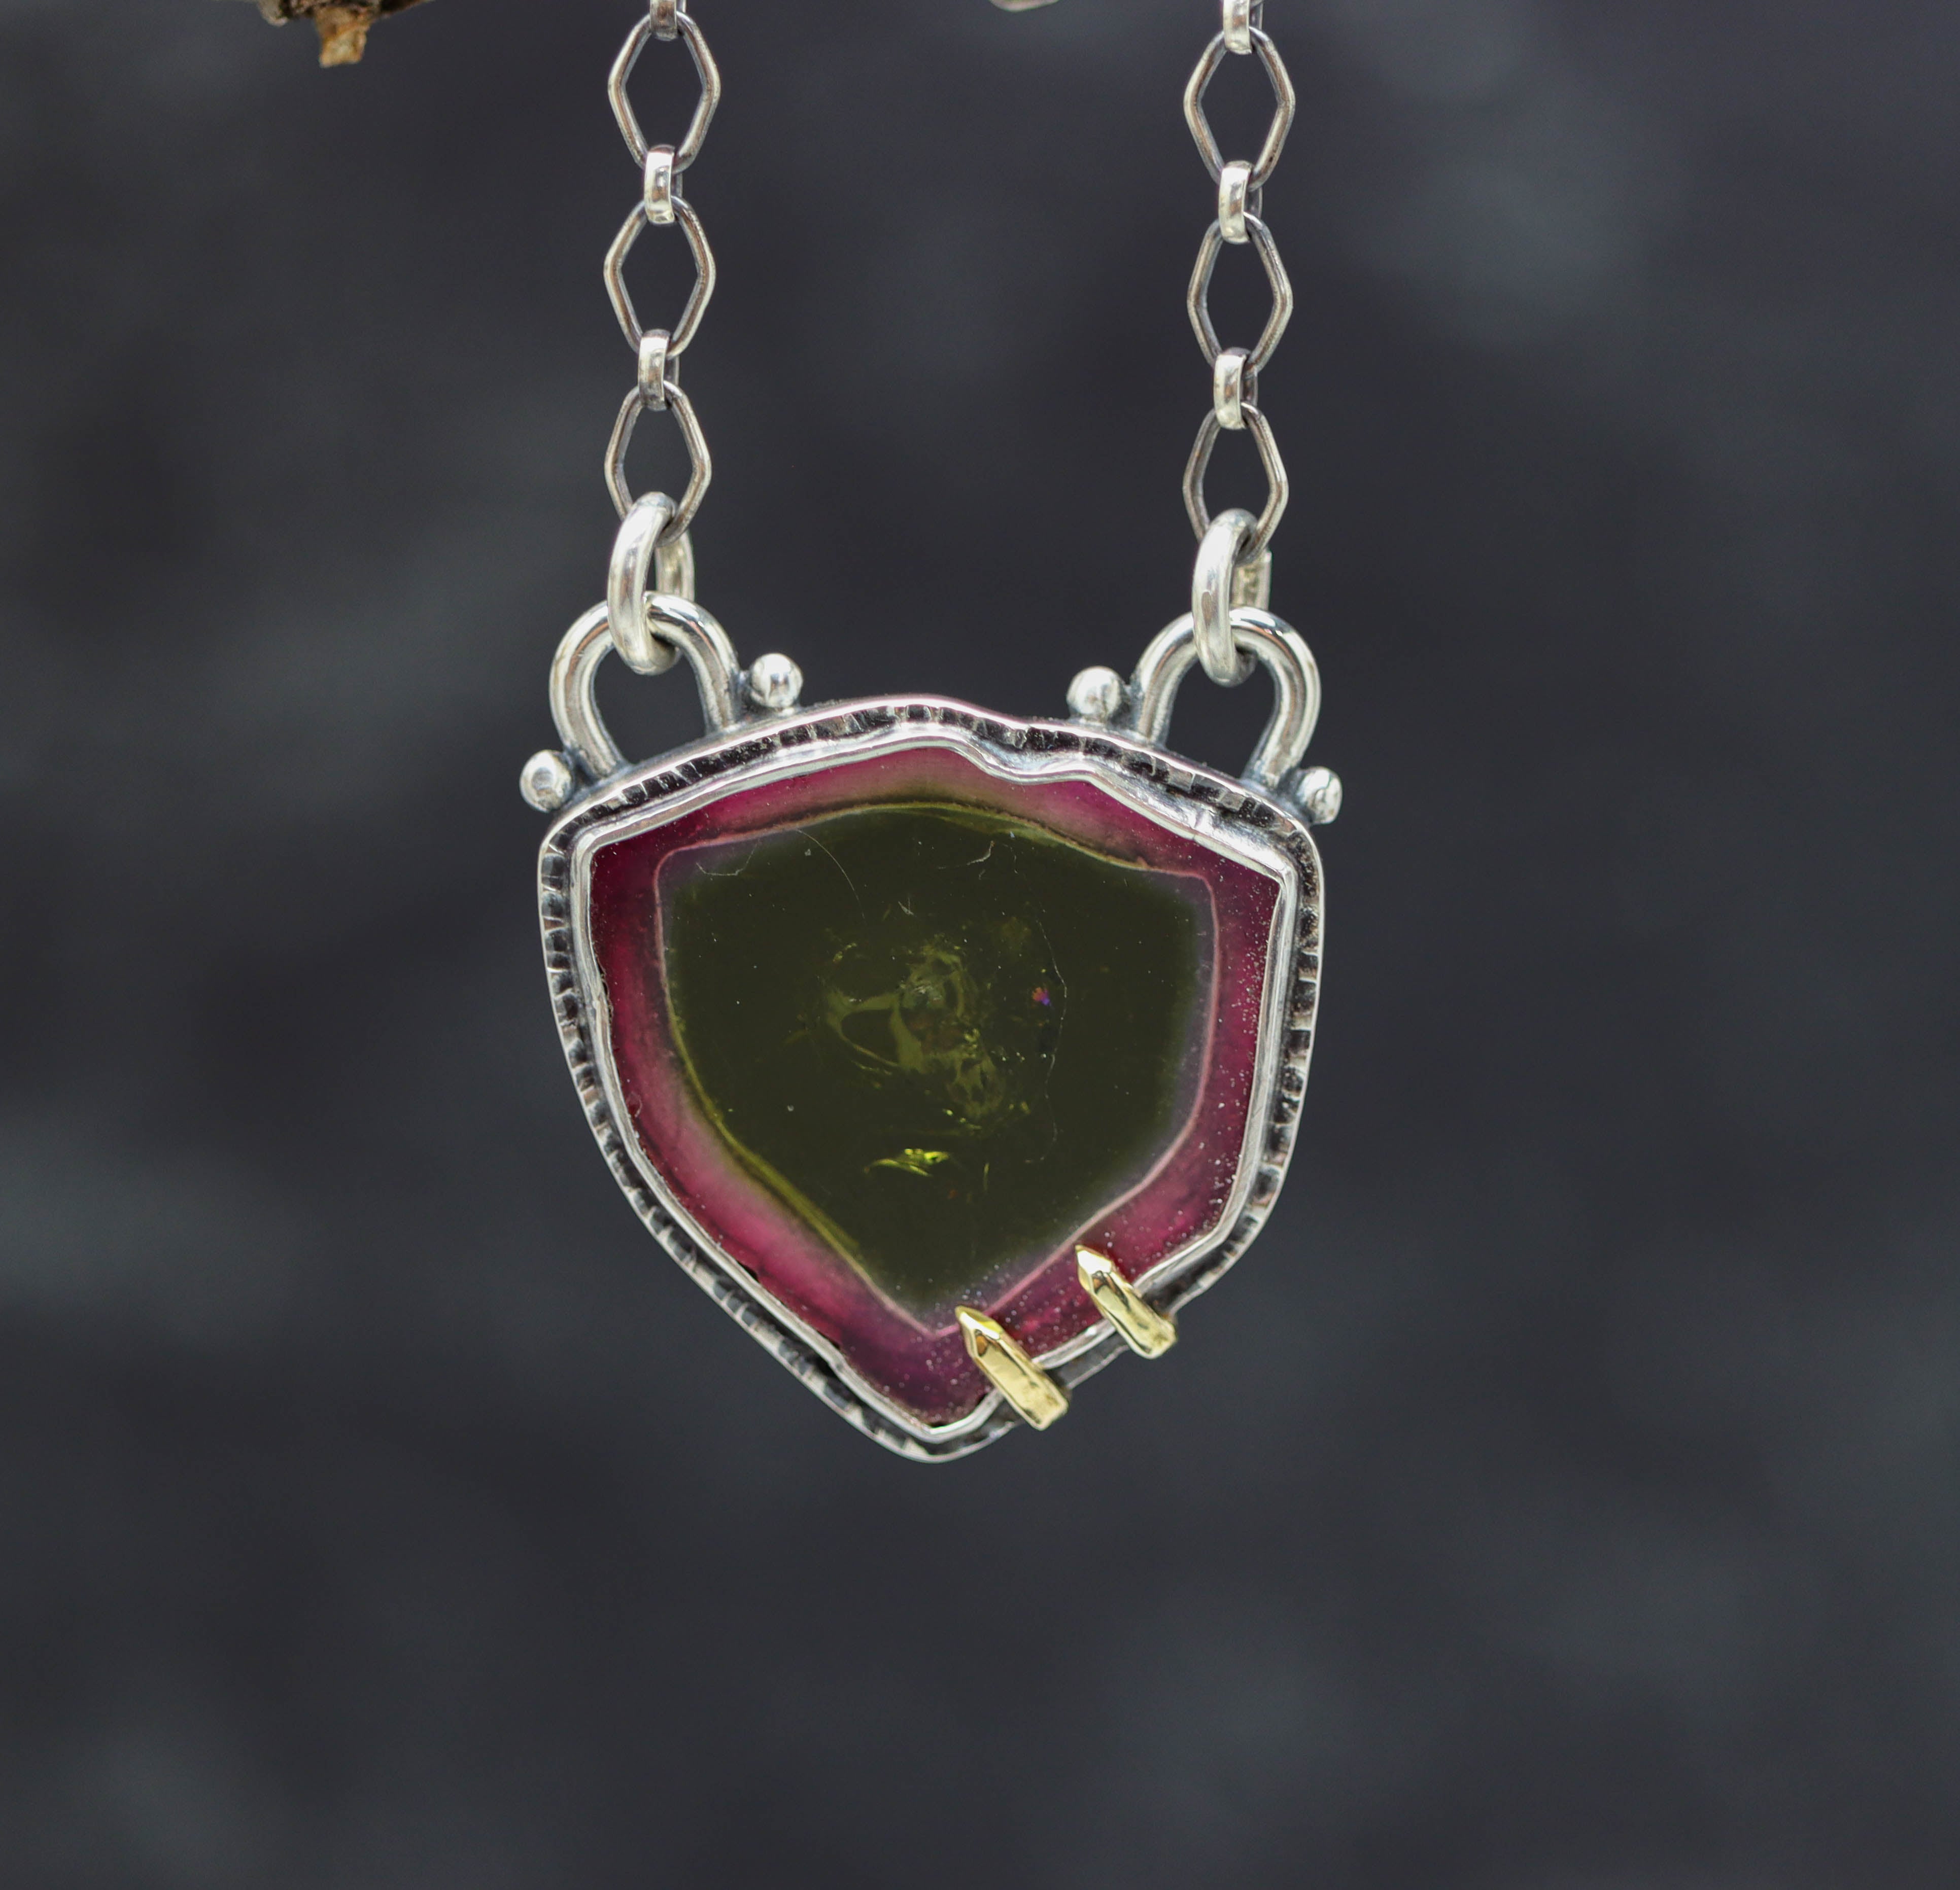 Stunning Raw Watermelon Tourmaline Slice Pendant Necklace Sterling Silver and 18k Gold